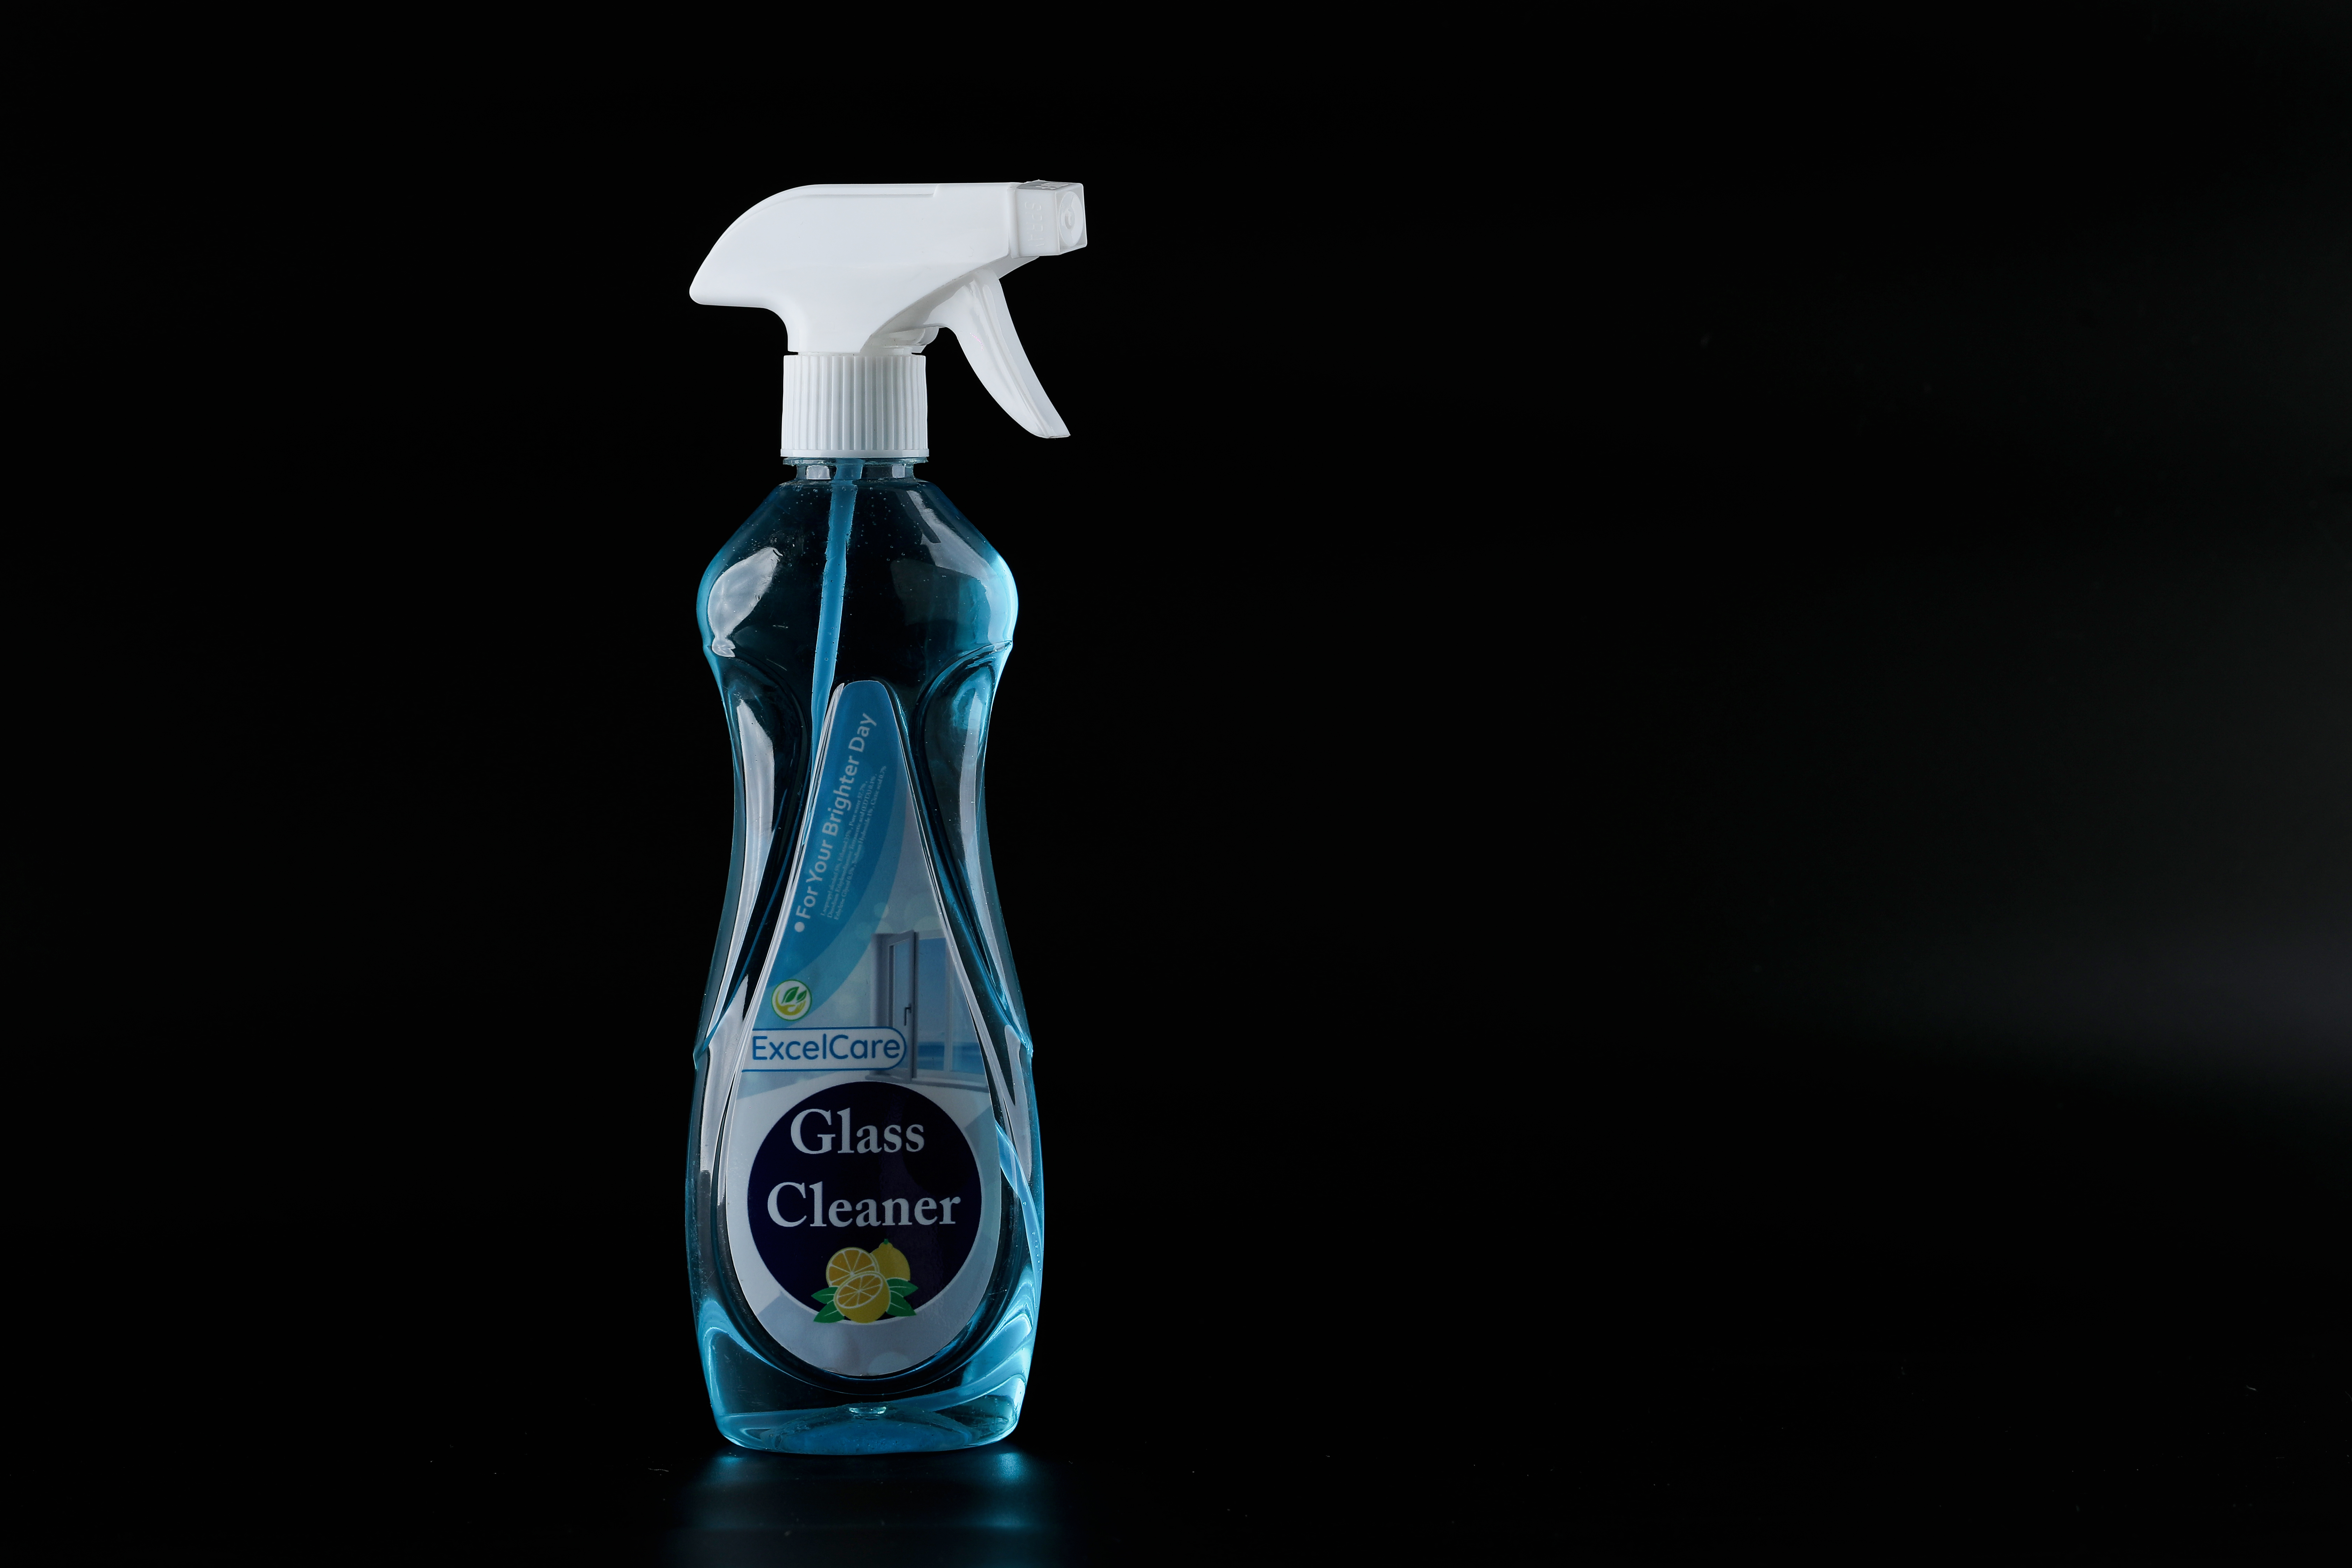 Glass Cleaner (ExcelCare)